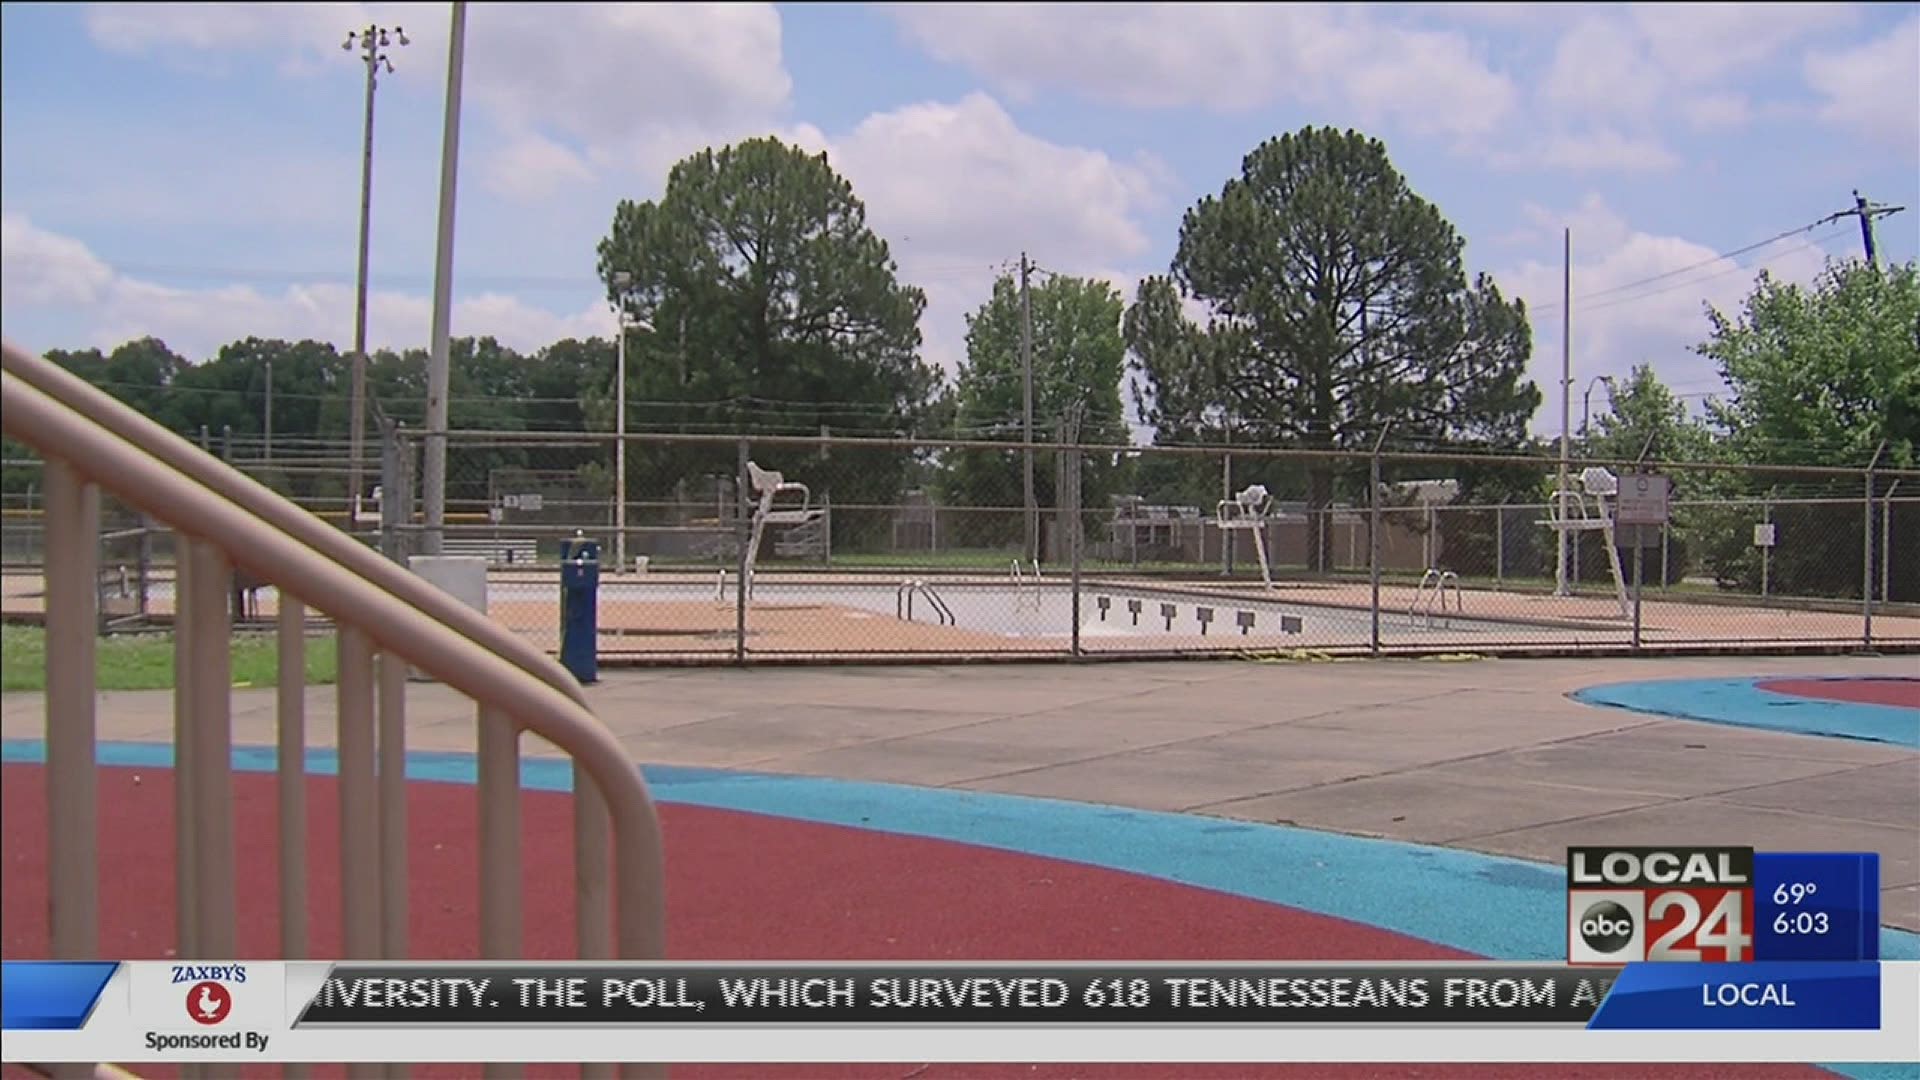 Memphis has yet to announce if, or when, it will open the city pools. Many private or community pools also remain closed